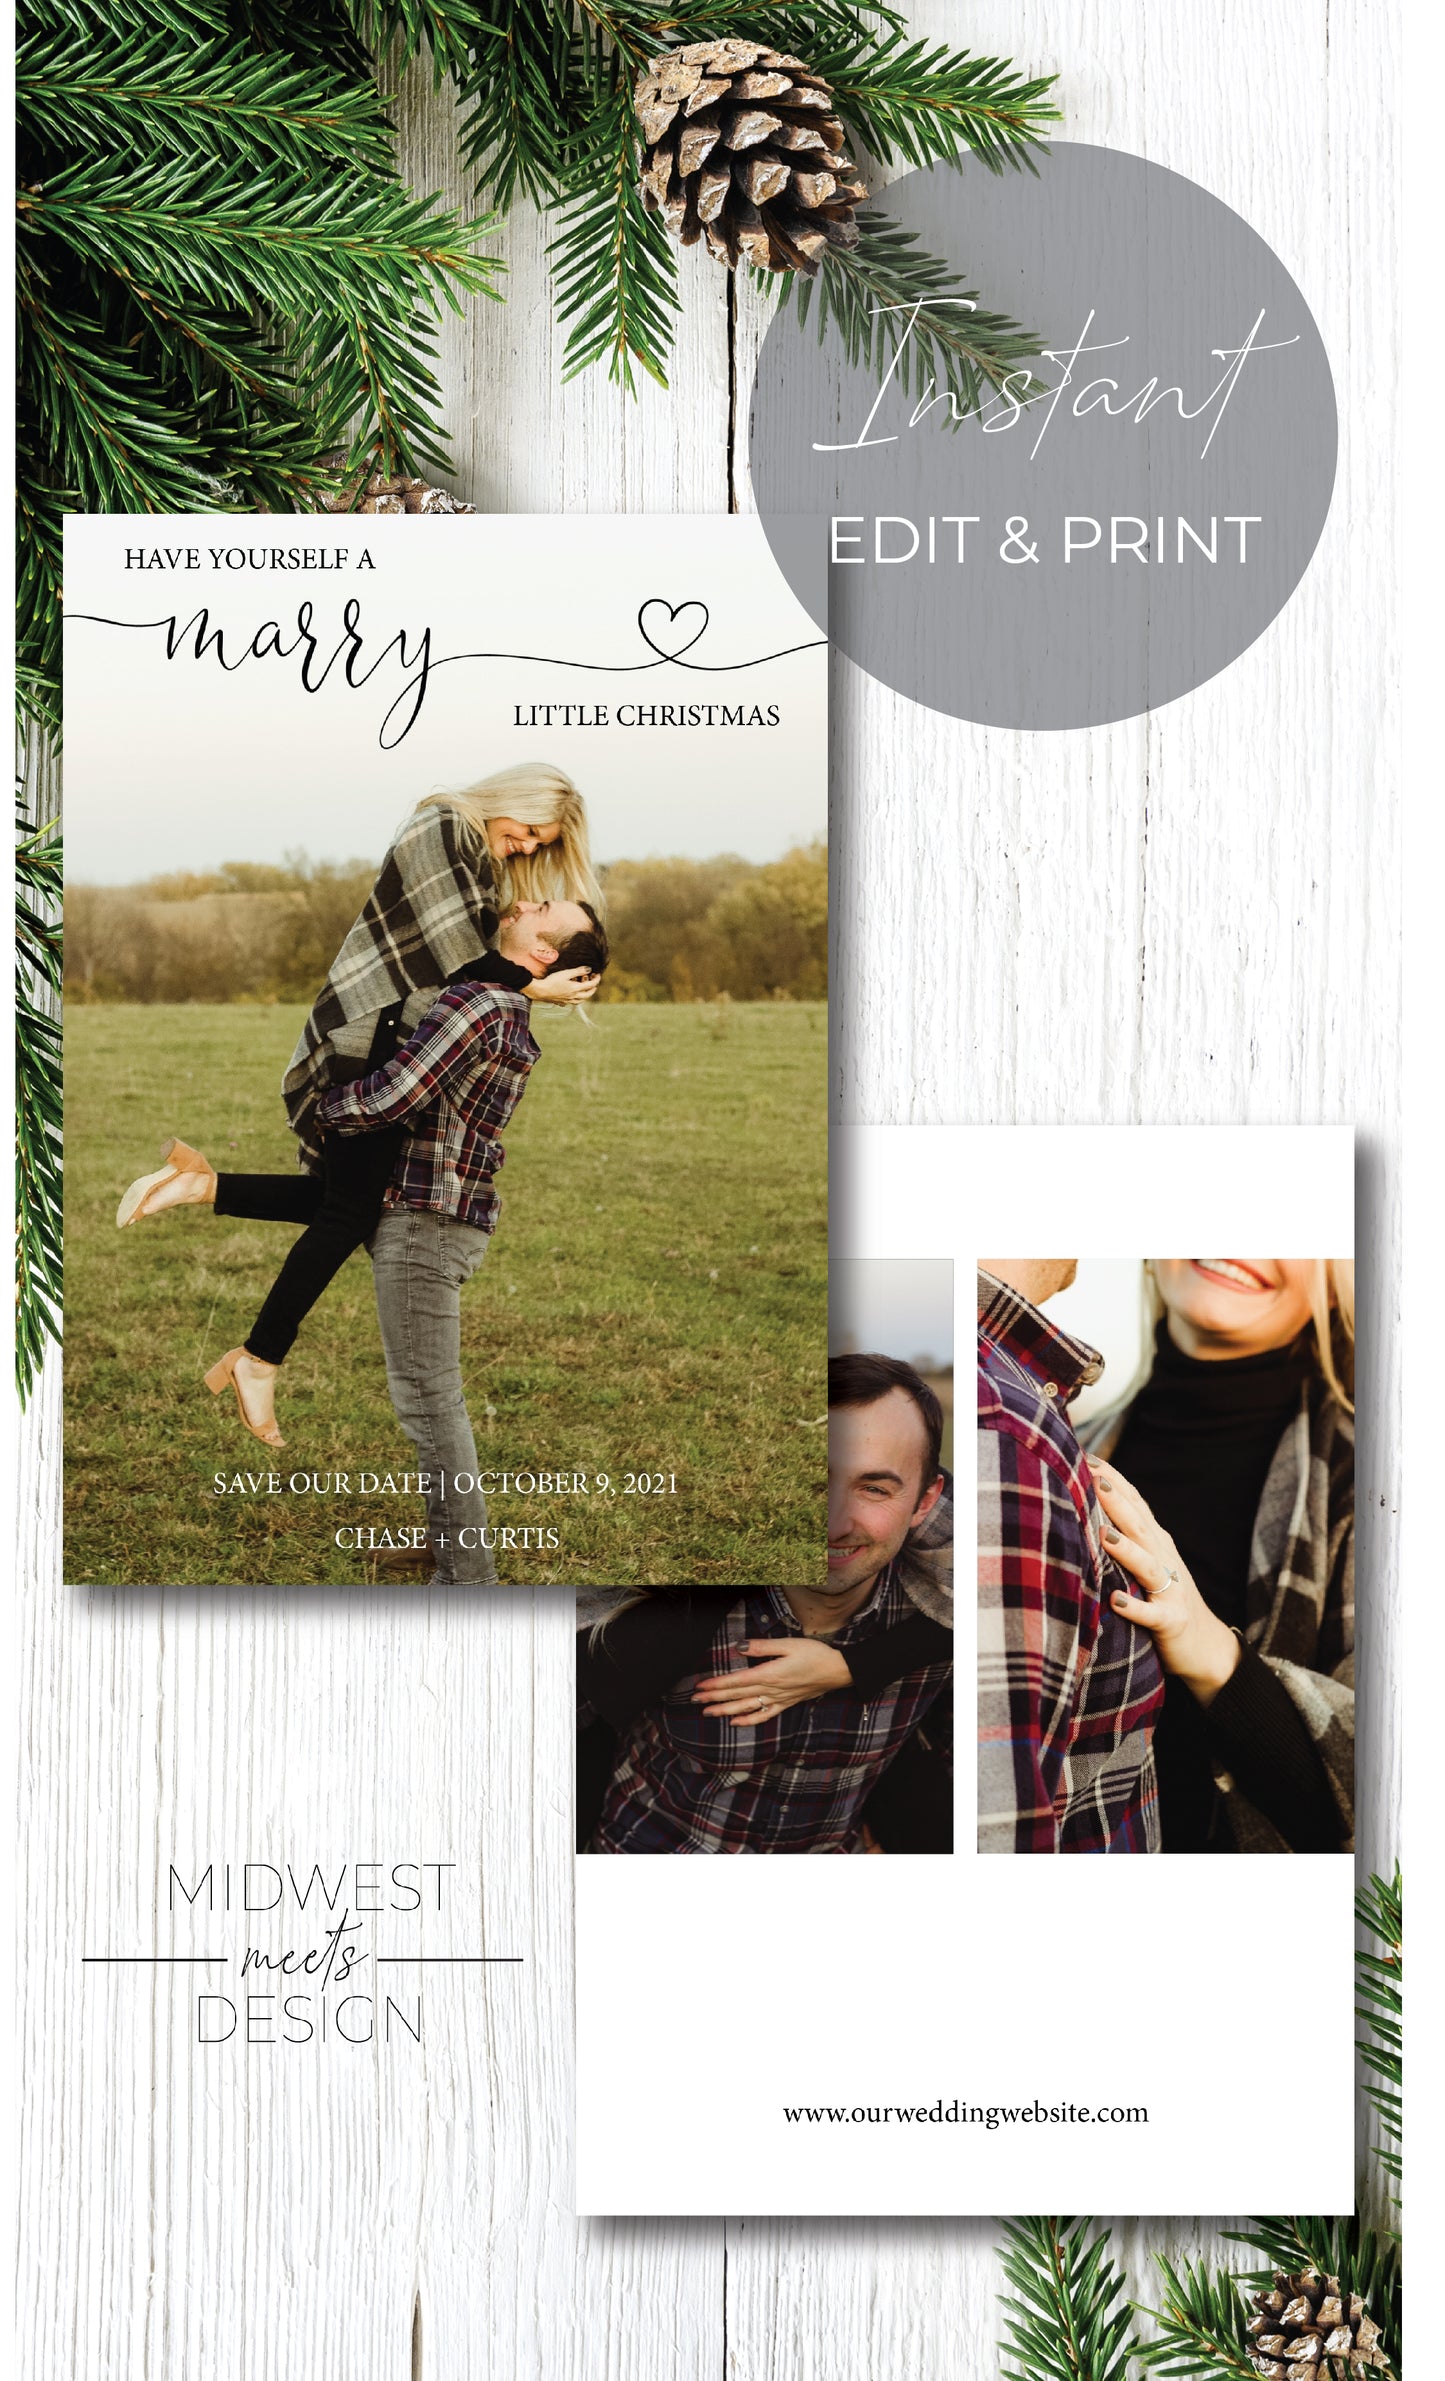 Wedding Save the Date (Have Yourself A Marry Little Christmas) - Digital Download